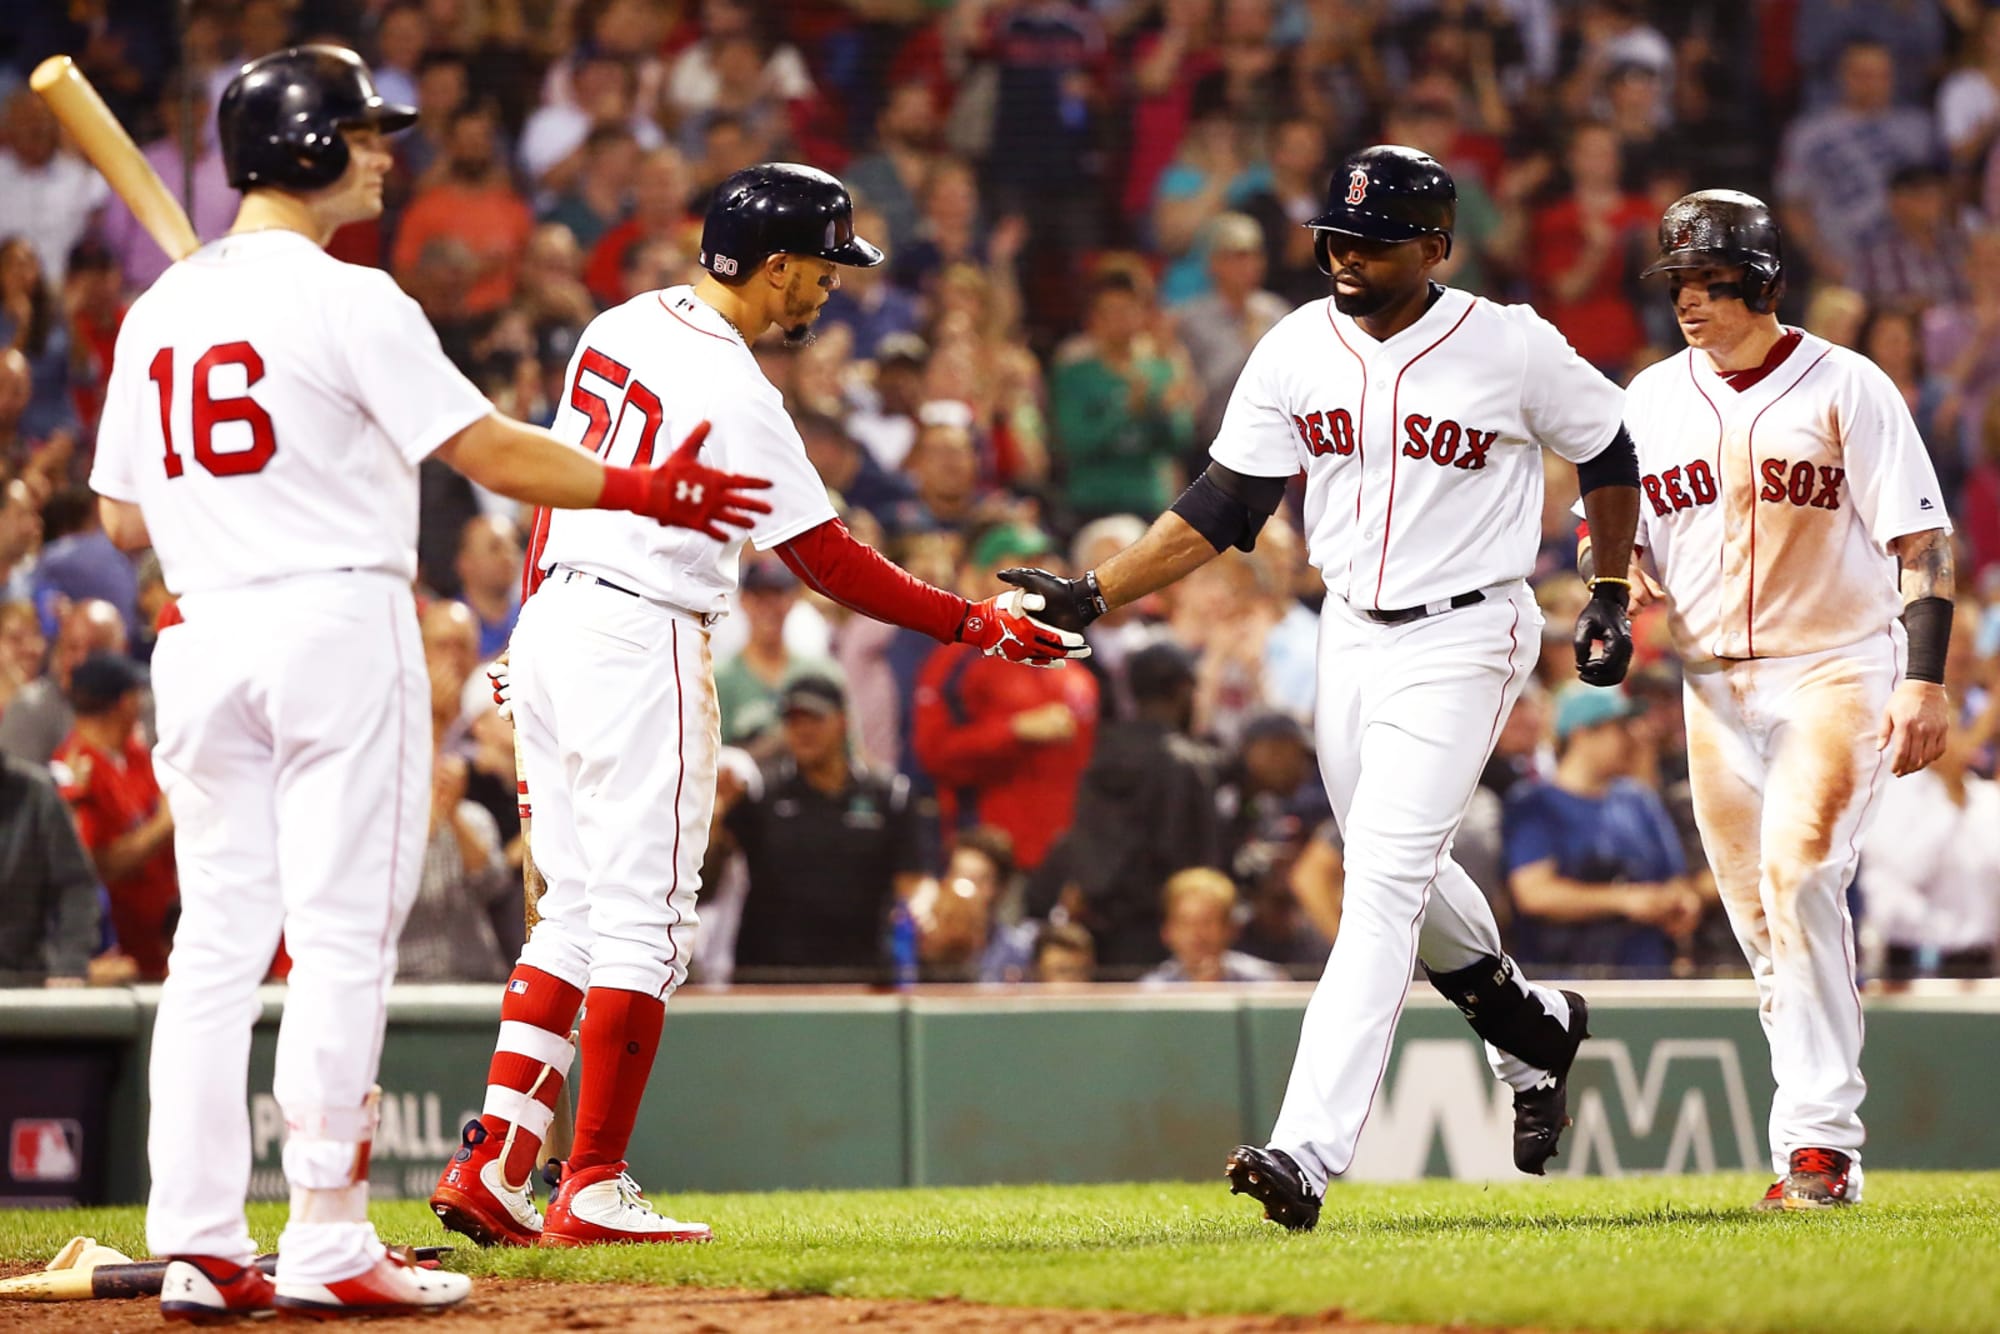 Boston Red Sox 100win season may be possible, but meaningless